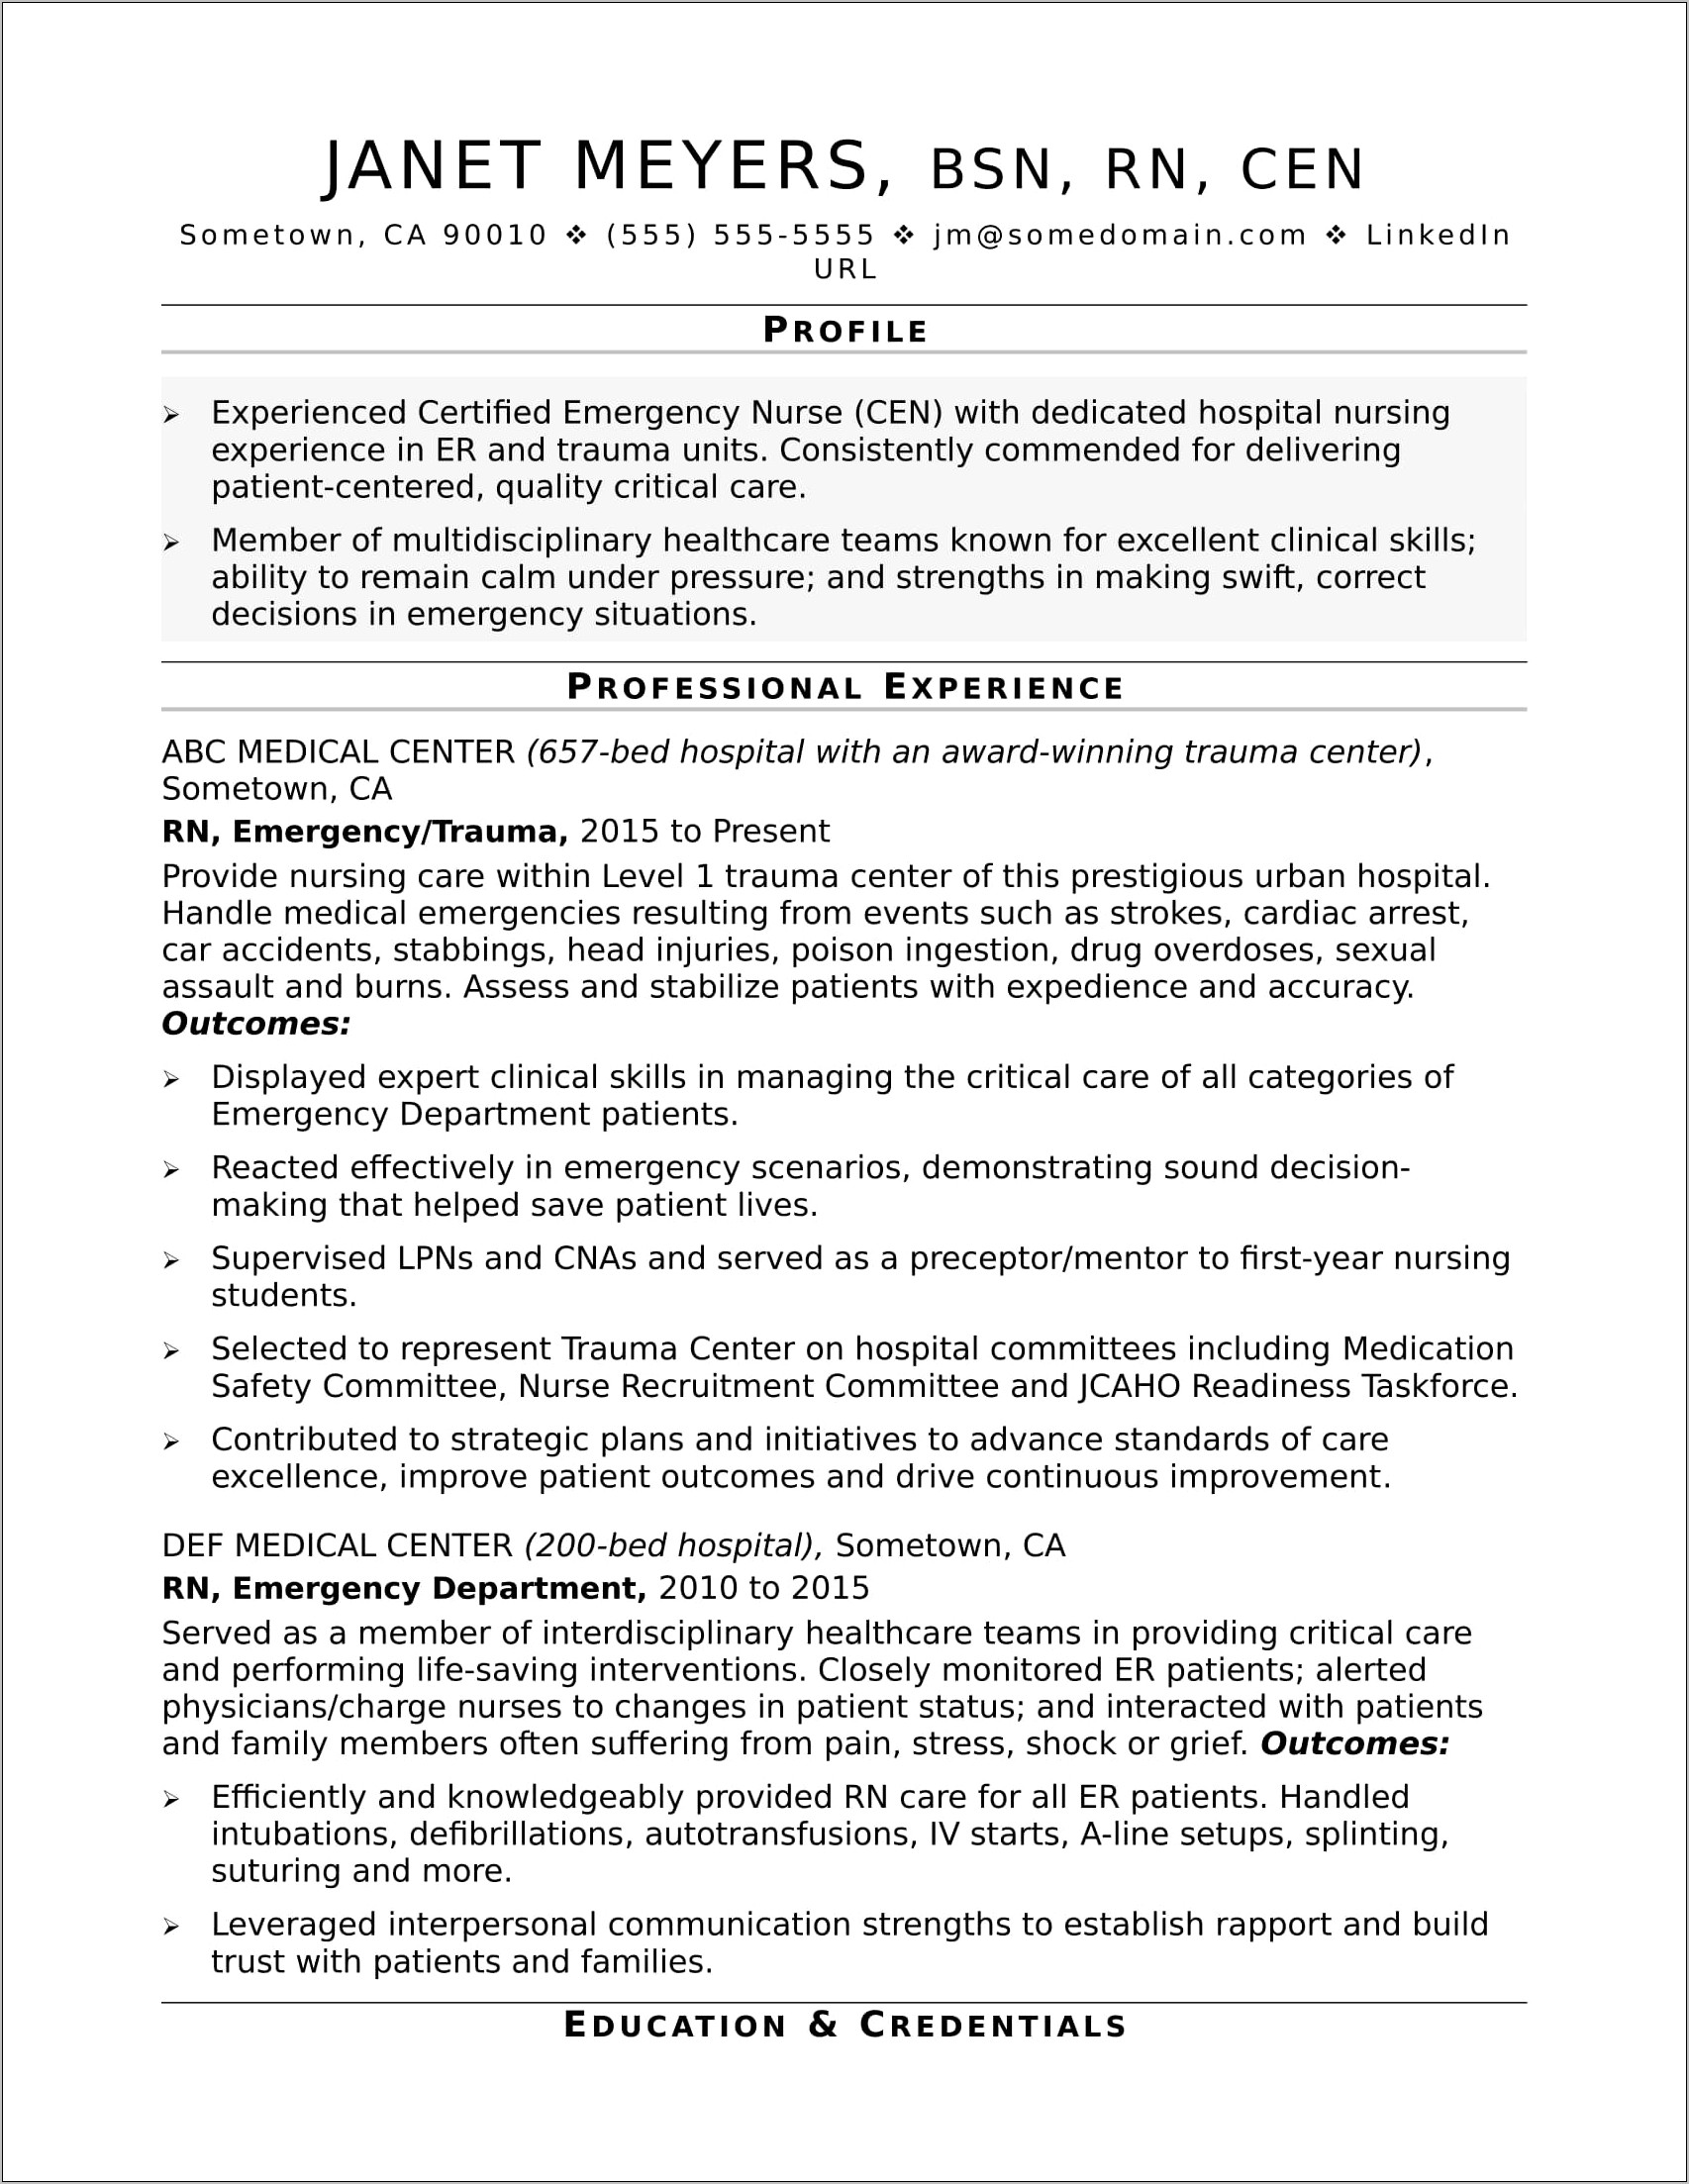 Nursing Resume Example Clinical Experience